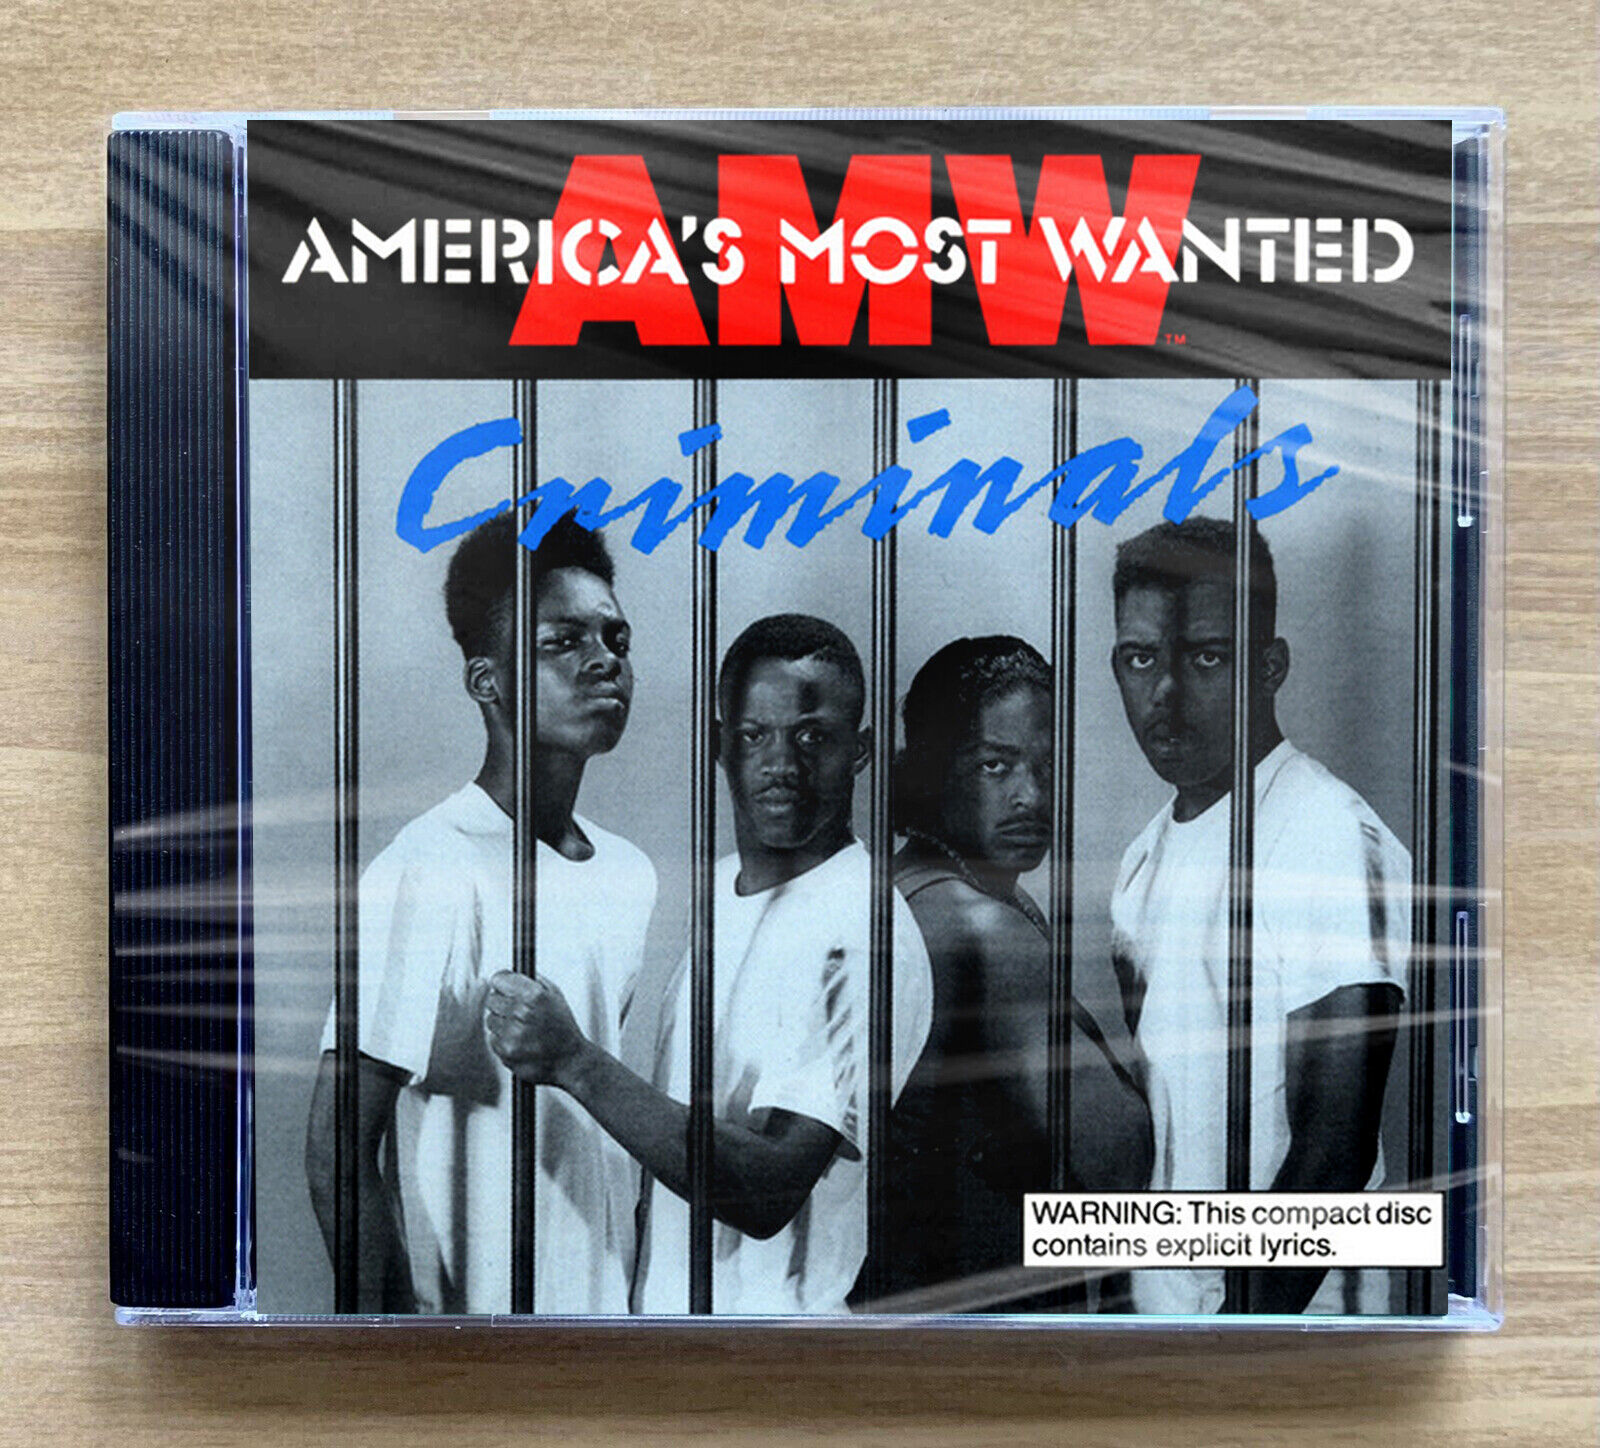 America's Most Wanted - Criminals (1990) Triad Records  TG-007-1-2222-2 CD NEW